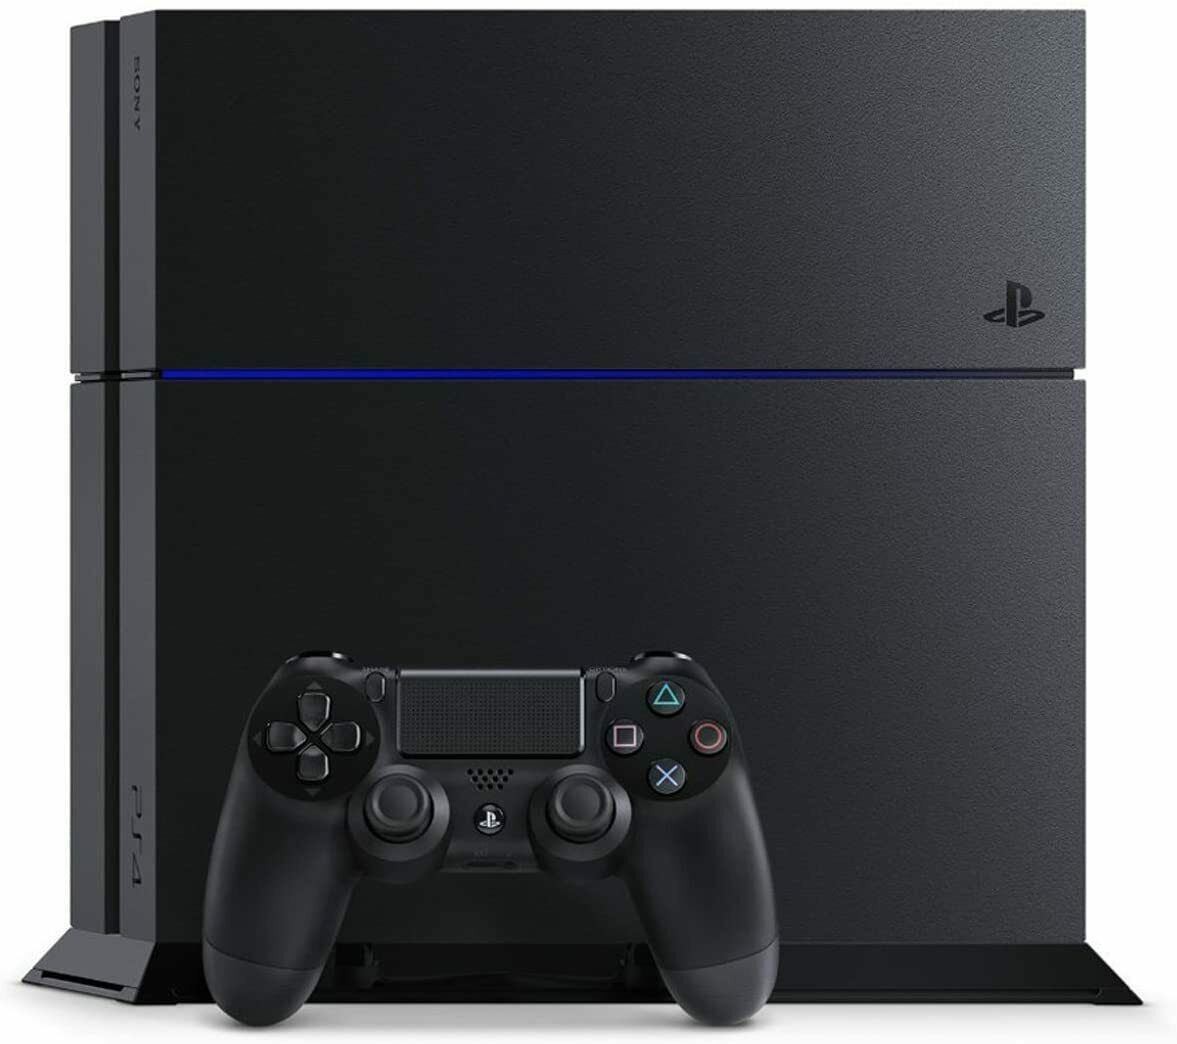 Primary image for Playstation 4 Sony PS4 Console 1TB (CUH-1200BB01) Jet Black